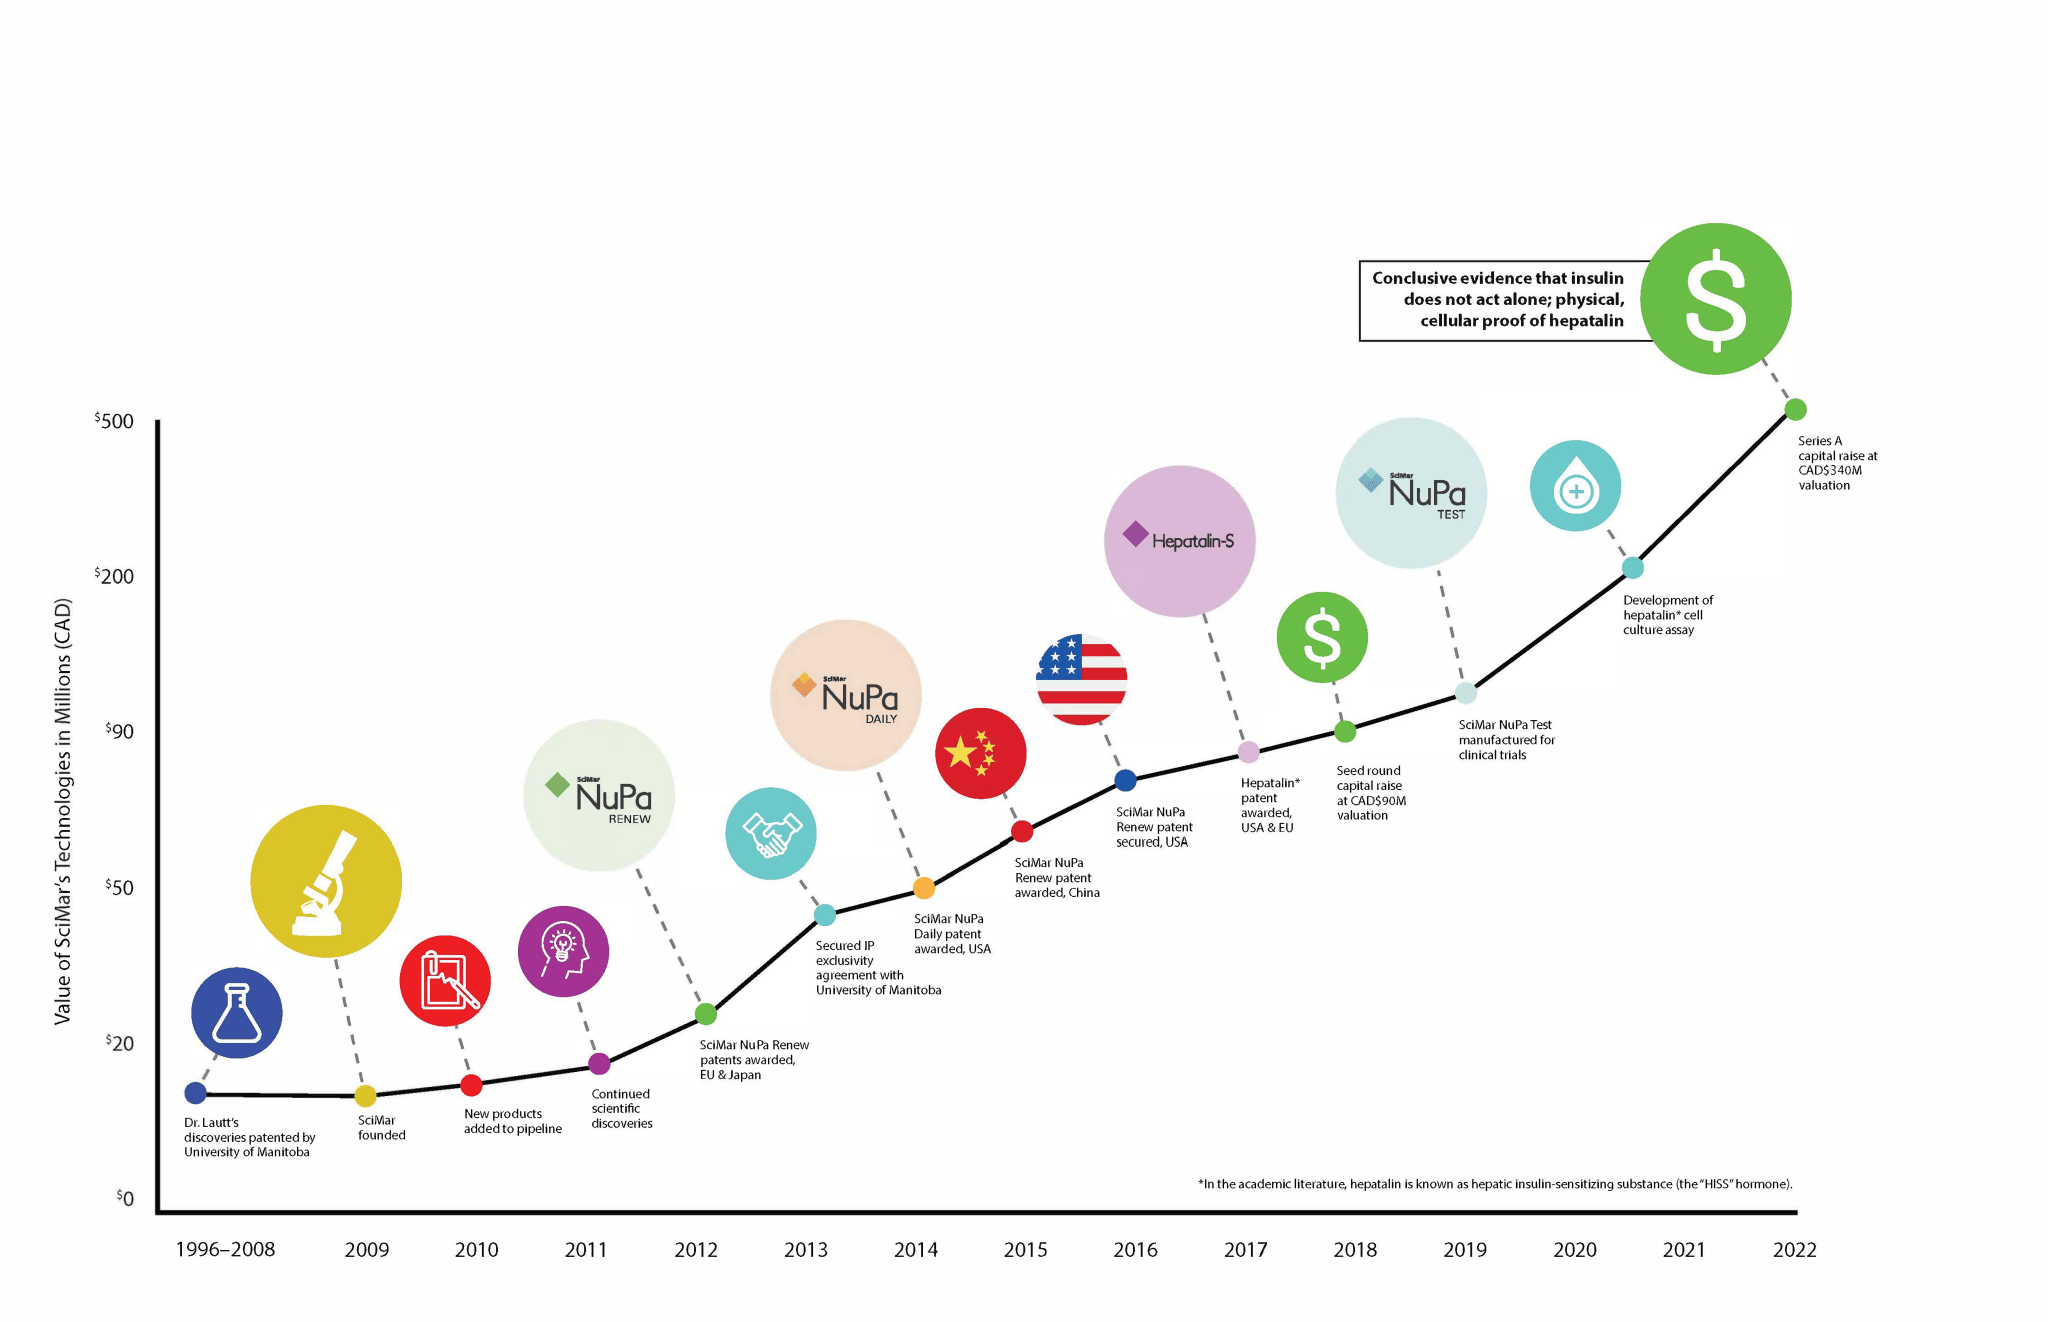 A graph displays Scimar's raise history. The y-axis lists the "Value of SciMar's Technology in Millions." It ranges from zero dollars to 500 million dollars in Canadian currency. The x-axis lists calendar years, ranging from 1996 to 2022. The value of Scimar's technology steadily grows higher with each passing year.